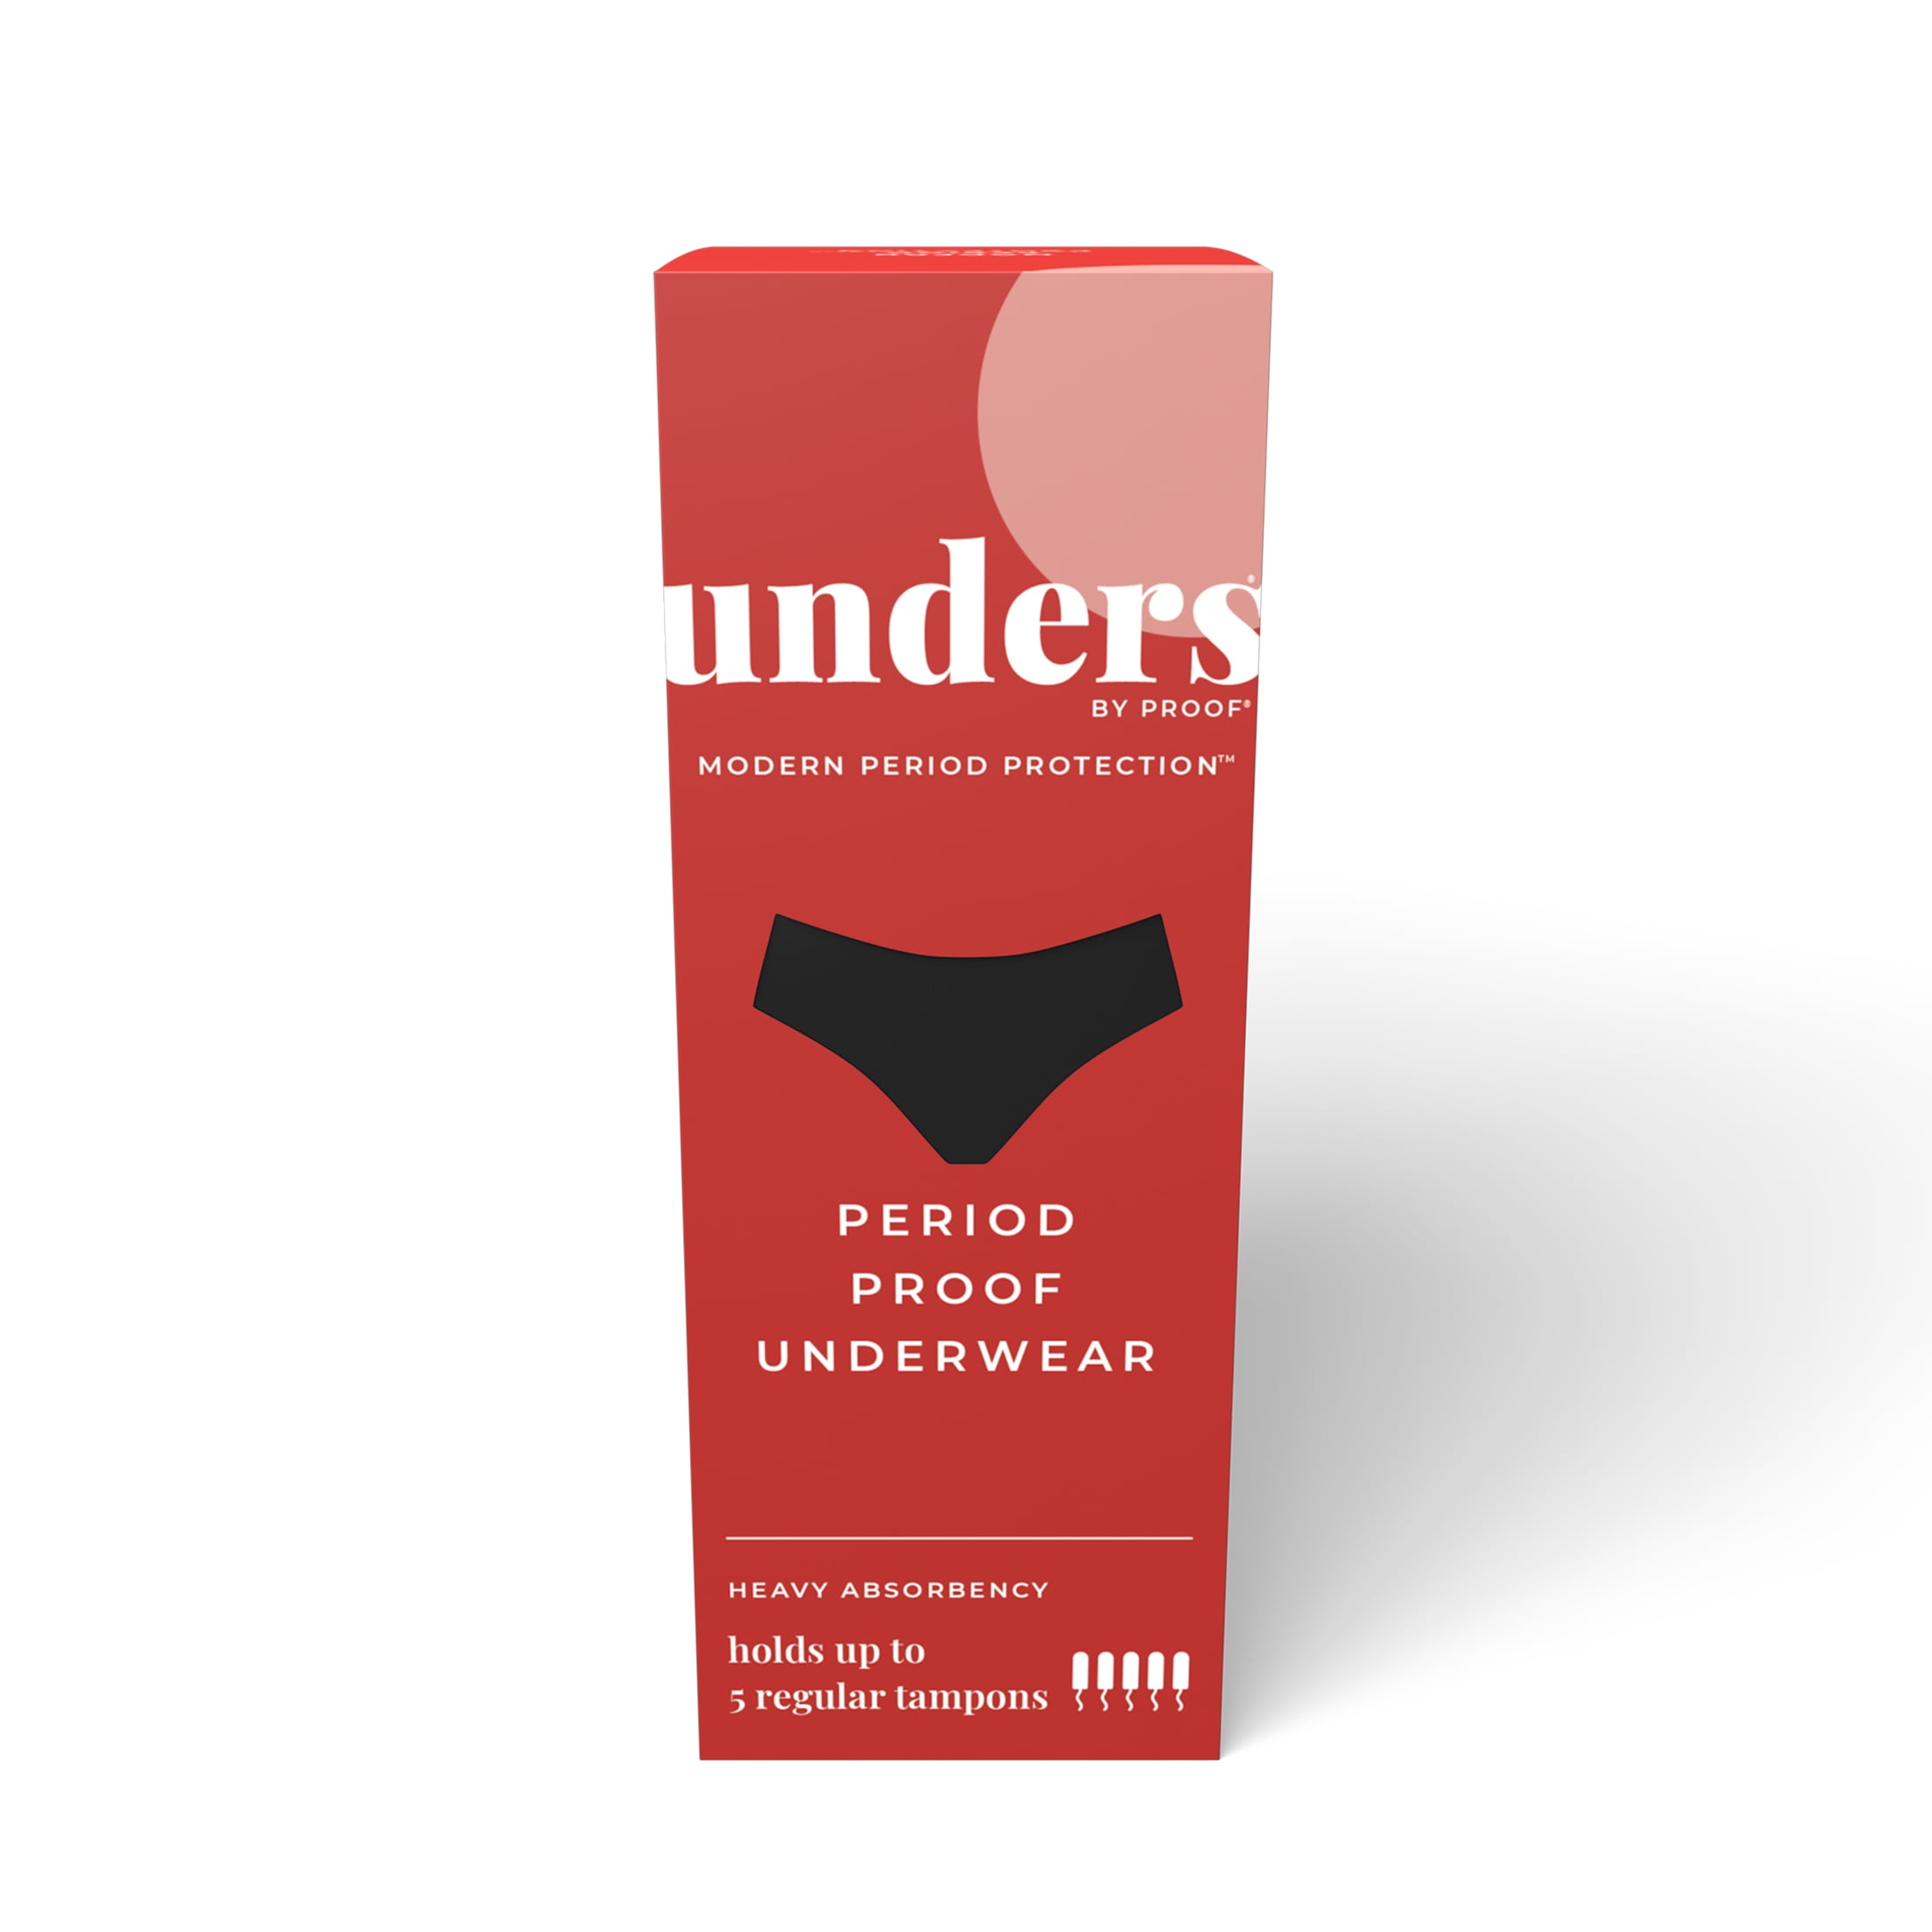 Unders by Proof Period Underwear - Heavy Brief (5 tampons / 8 tsps